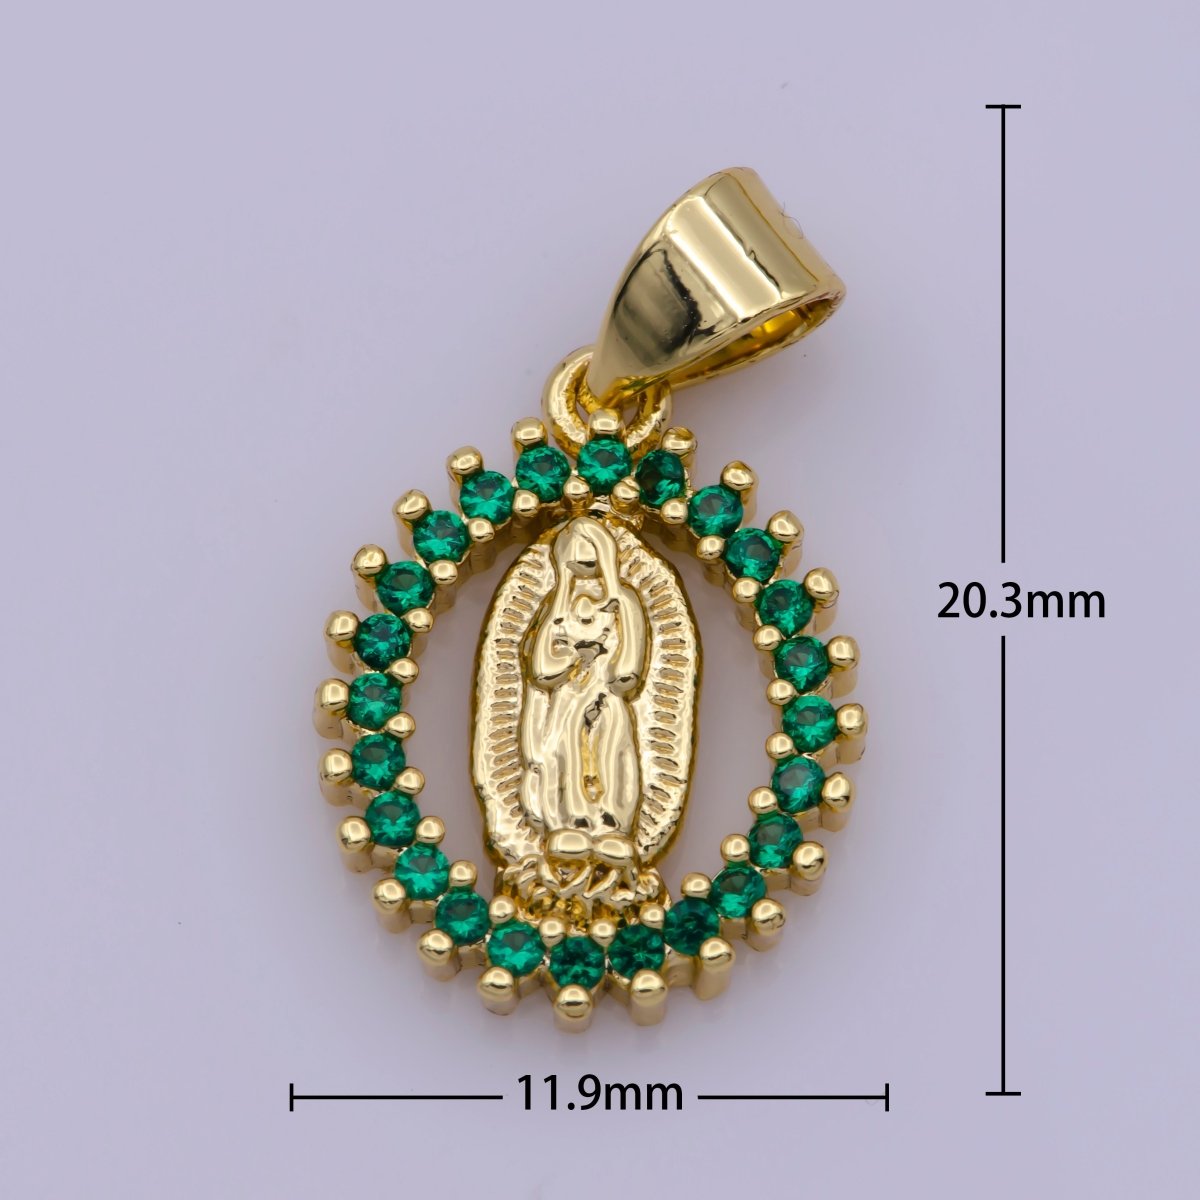 14k Gold Filled Virgin Mary Pendant Necklace Pink Micro Pave Virgen de Guadalupe Medallion Pendant for Necklace Religious Jewelry Supply I-002 I-901~I-904 N-1406 - DLUXCA